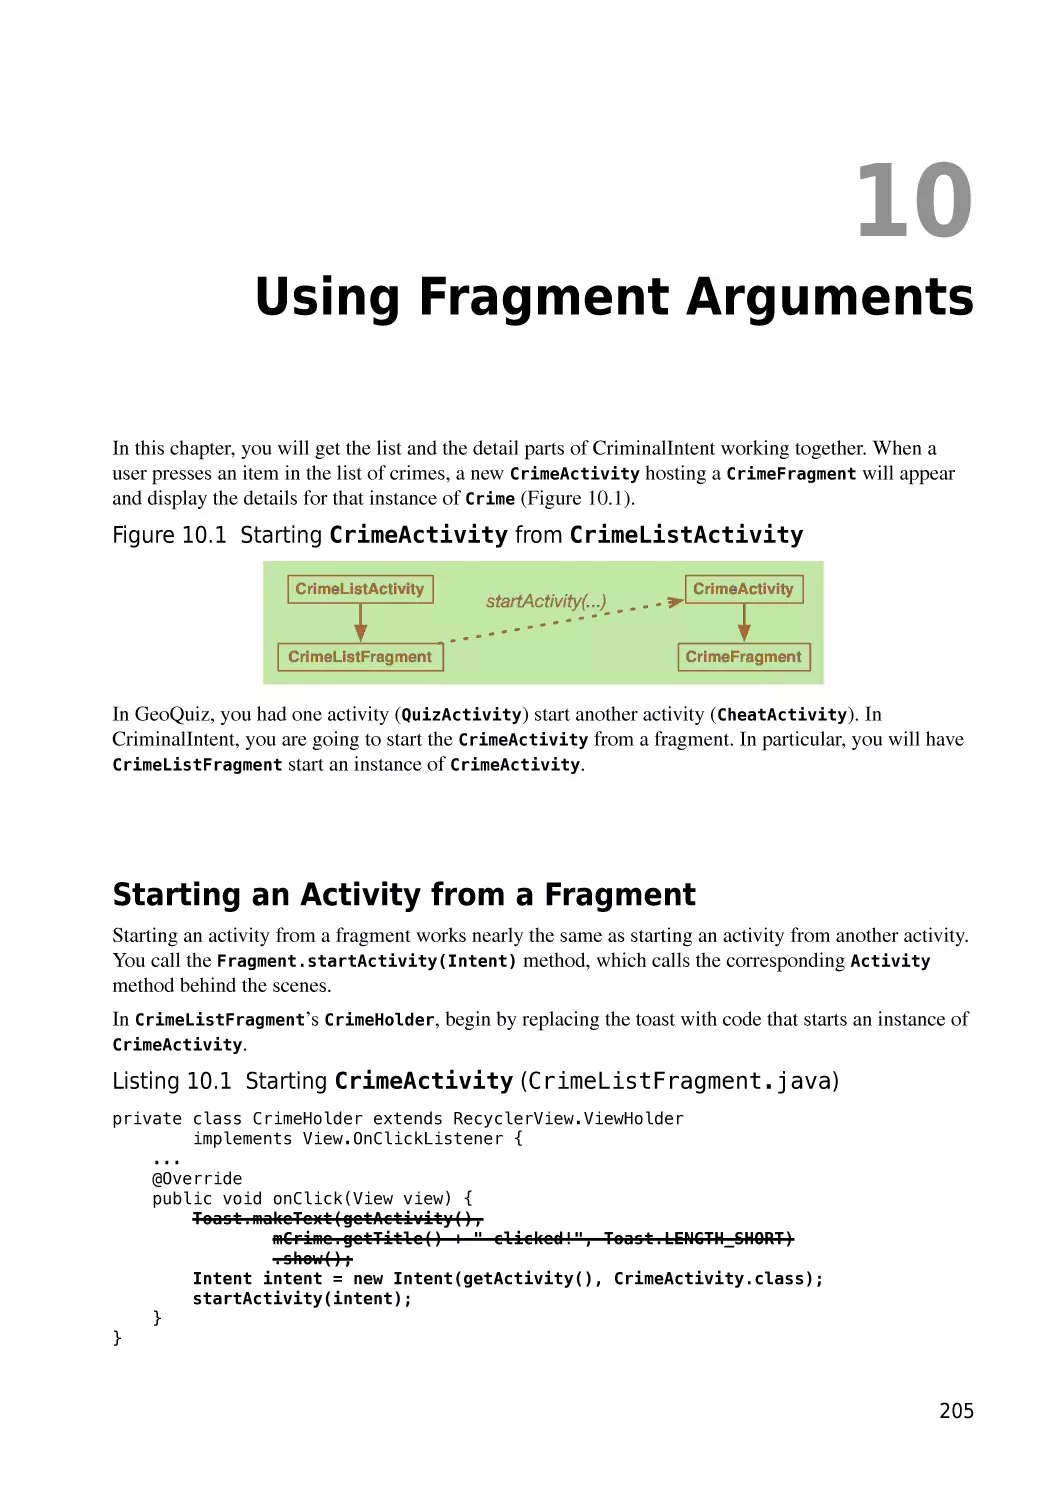 Chapter 10  Using Fragment Arguments
Starting an Activity from a Fragment